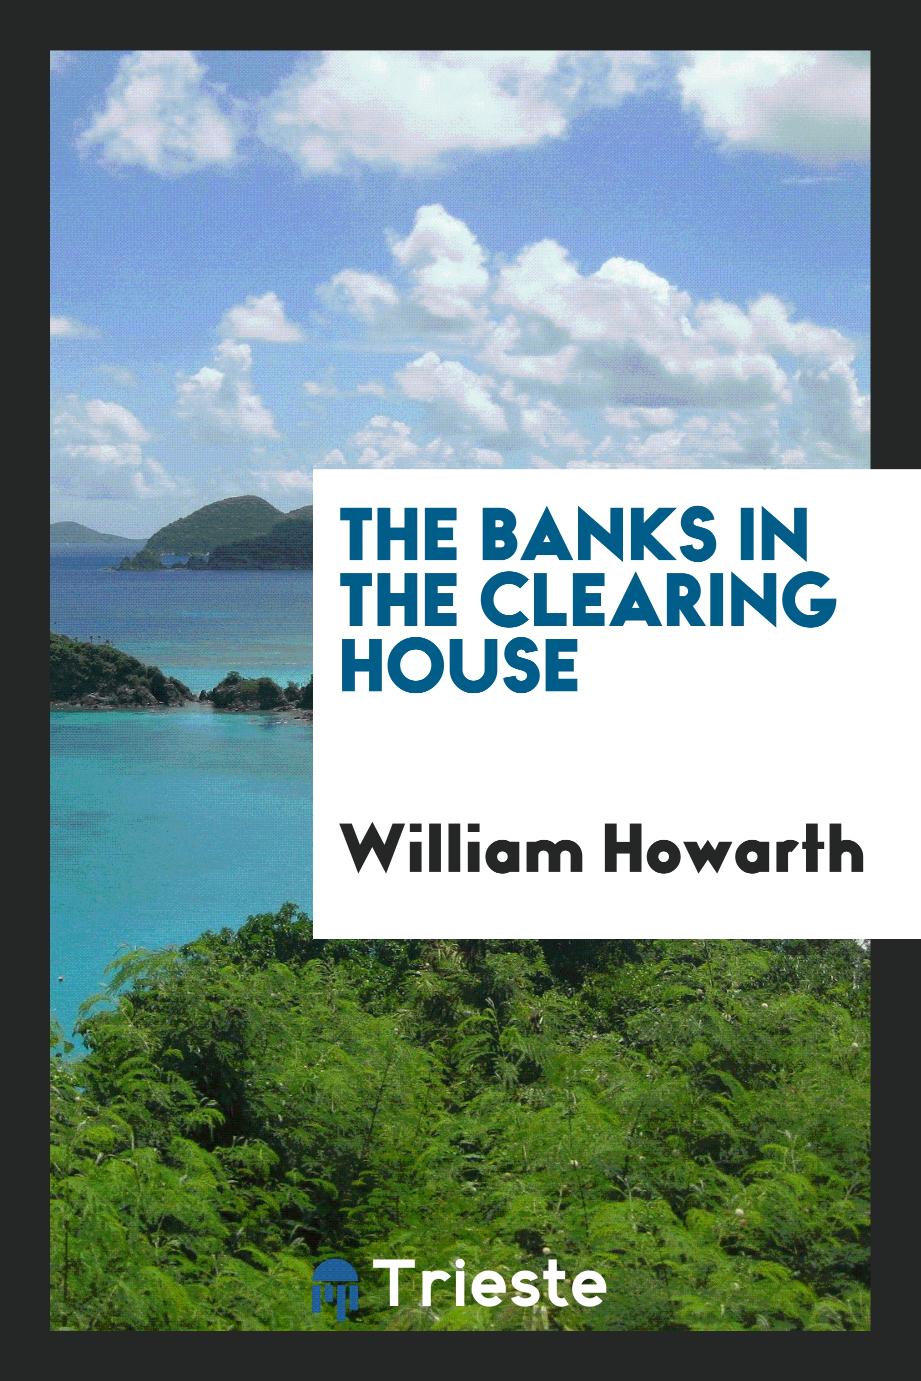 The banks in the clearing house